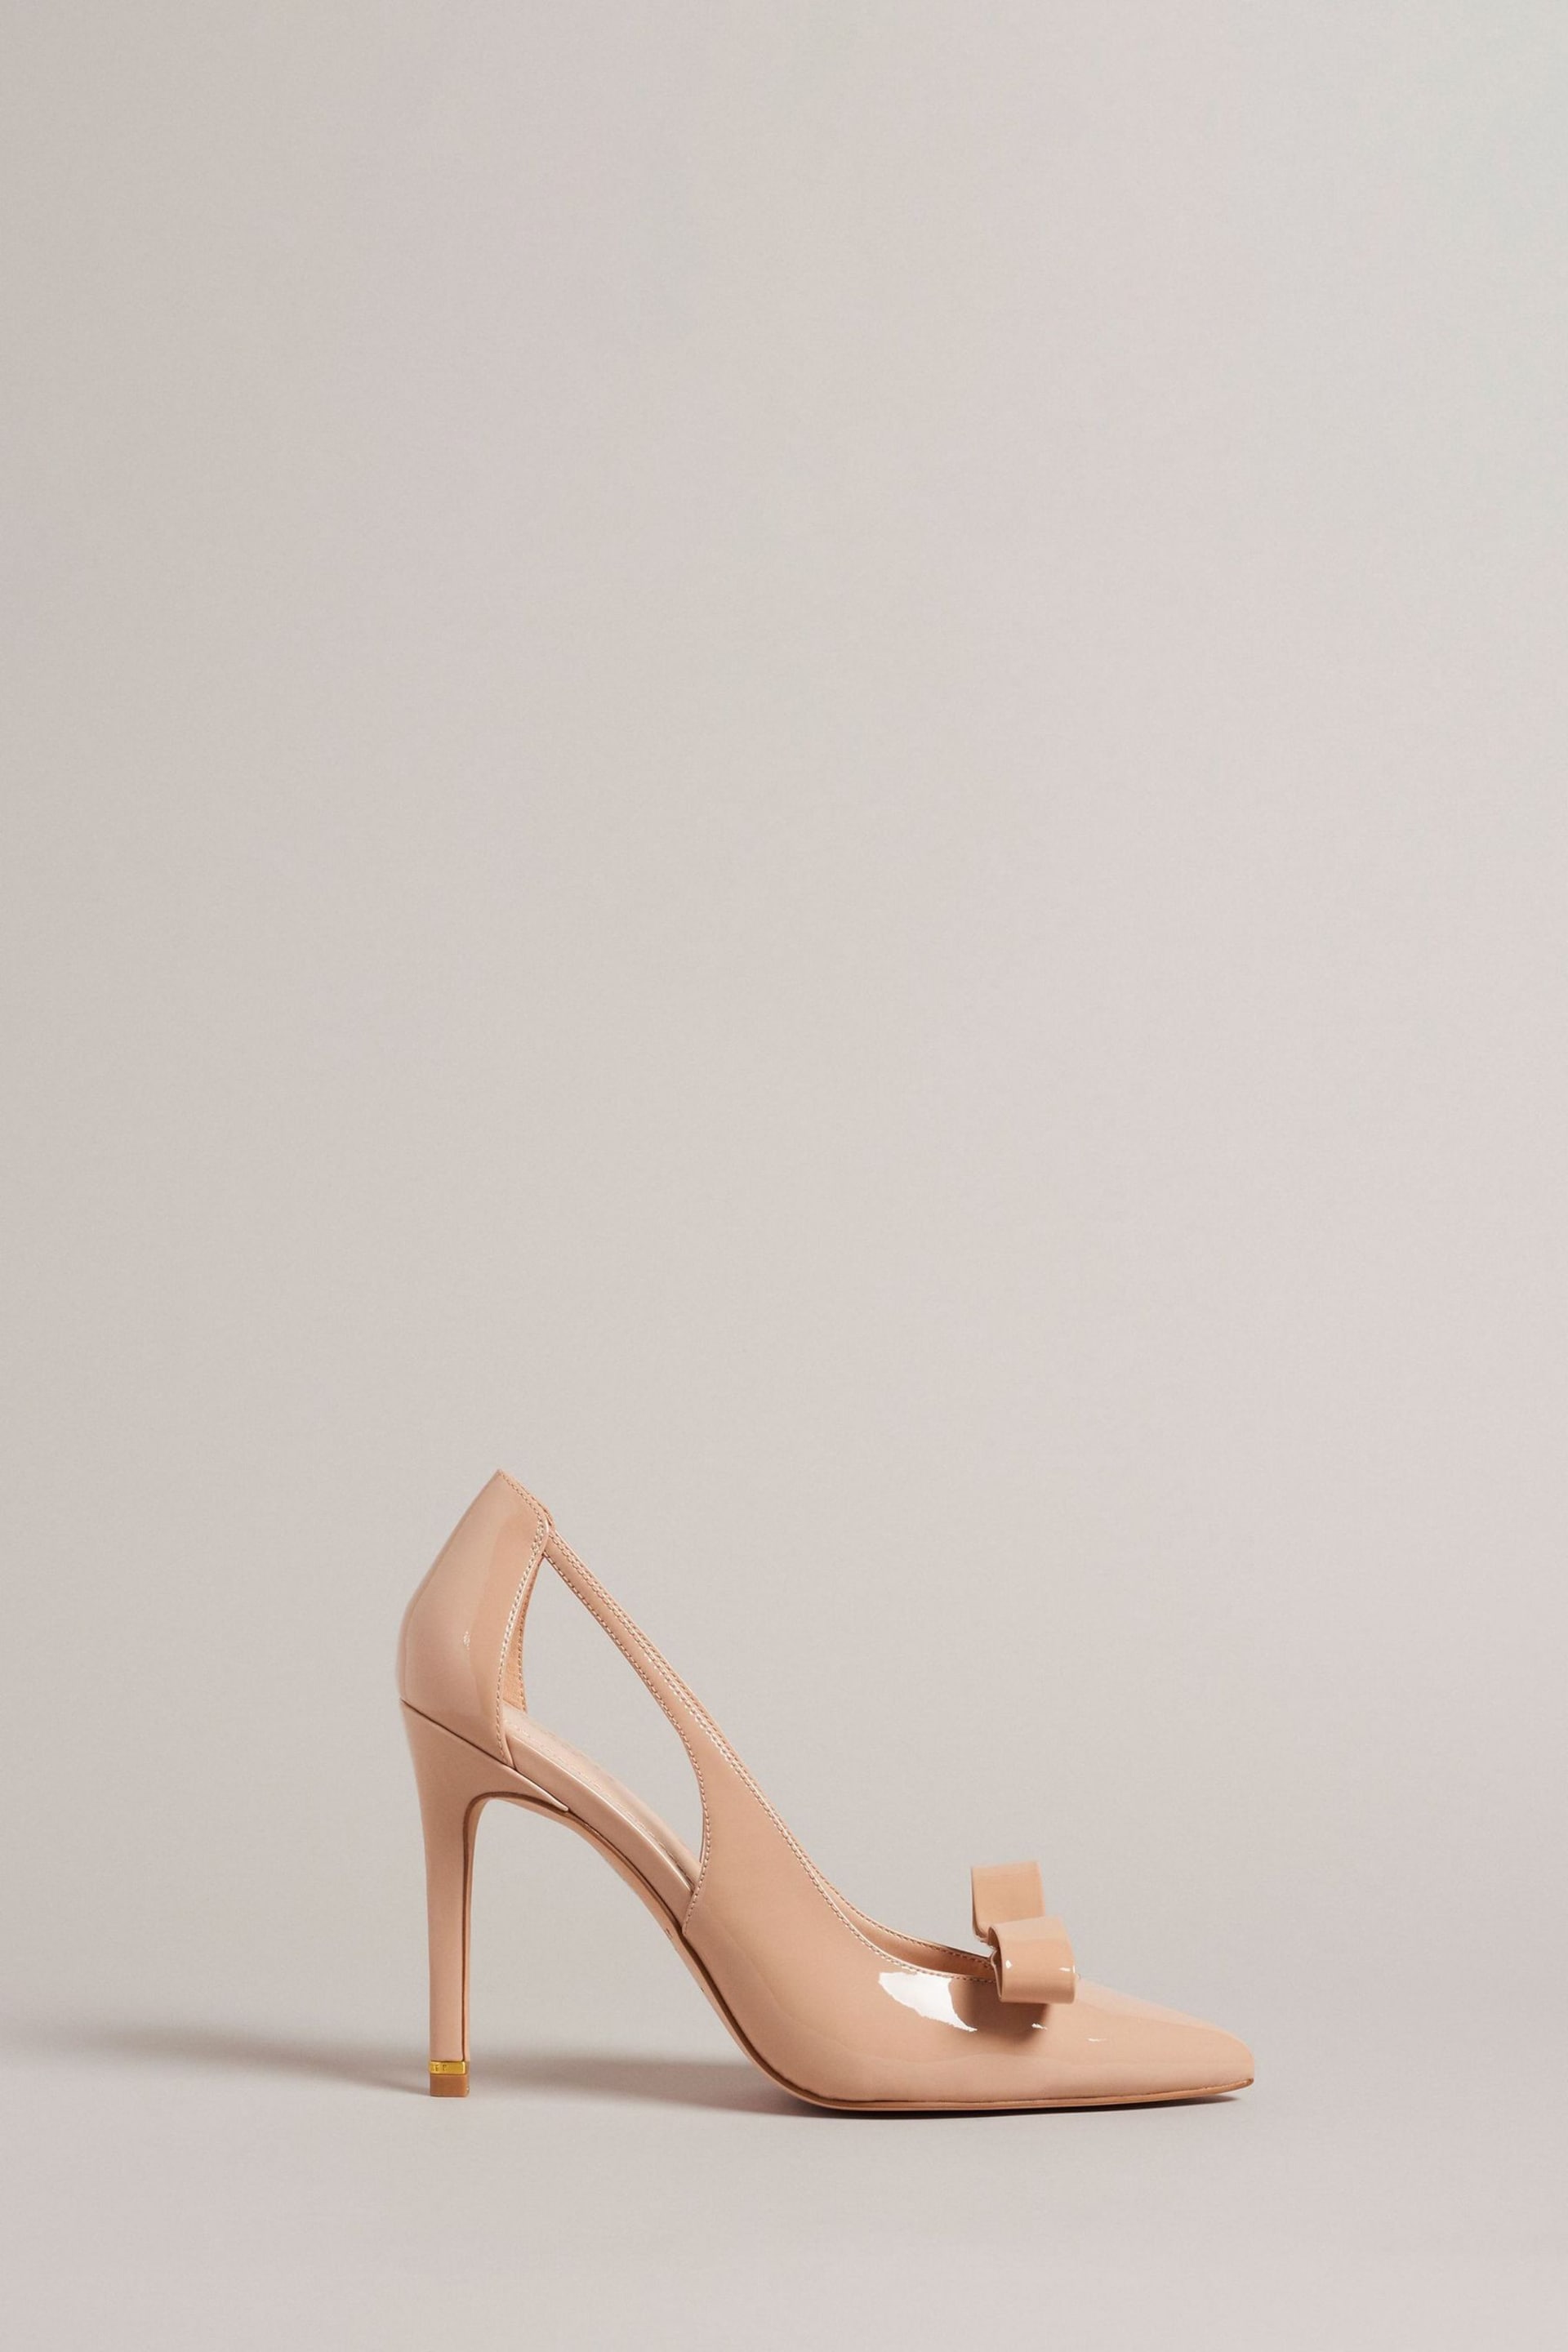 Ted Baker Natural Orliney Patent Bow 100mm Cut-Out Detail Courts - Image 1 of 5